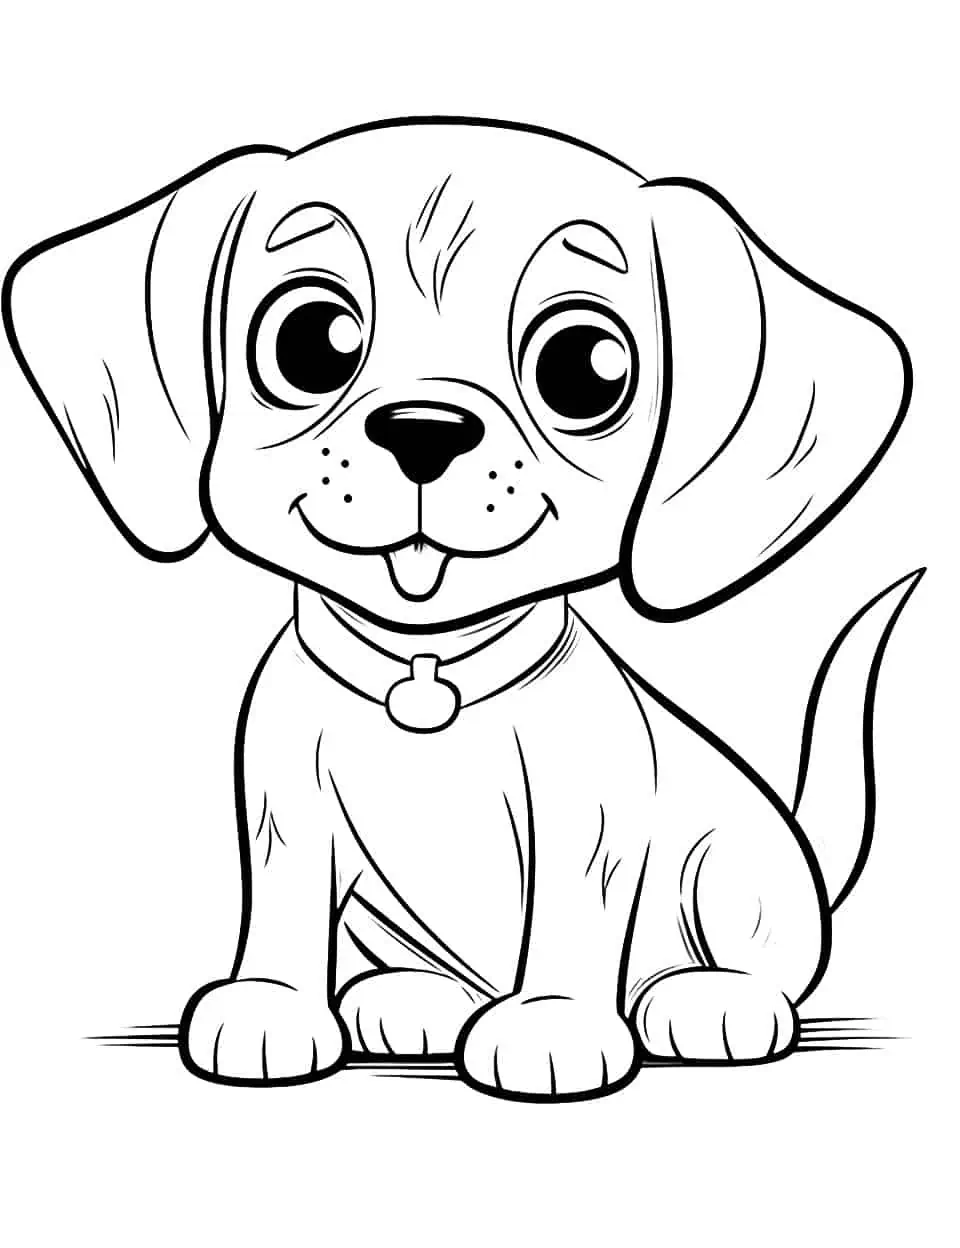 Kawaii Beagle Puppy Coloring Page - A Beagle puppy drawn in a cute, kawaii style with big, lovable eyes.